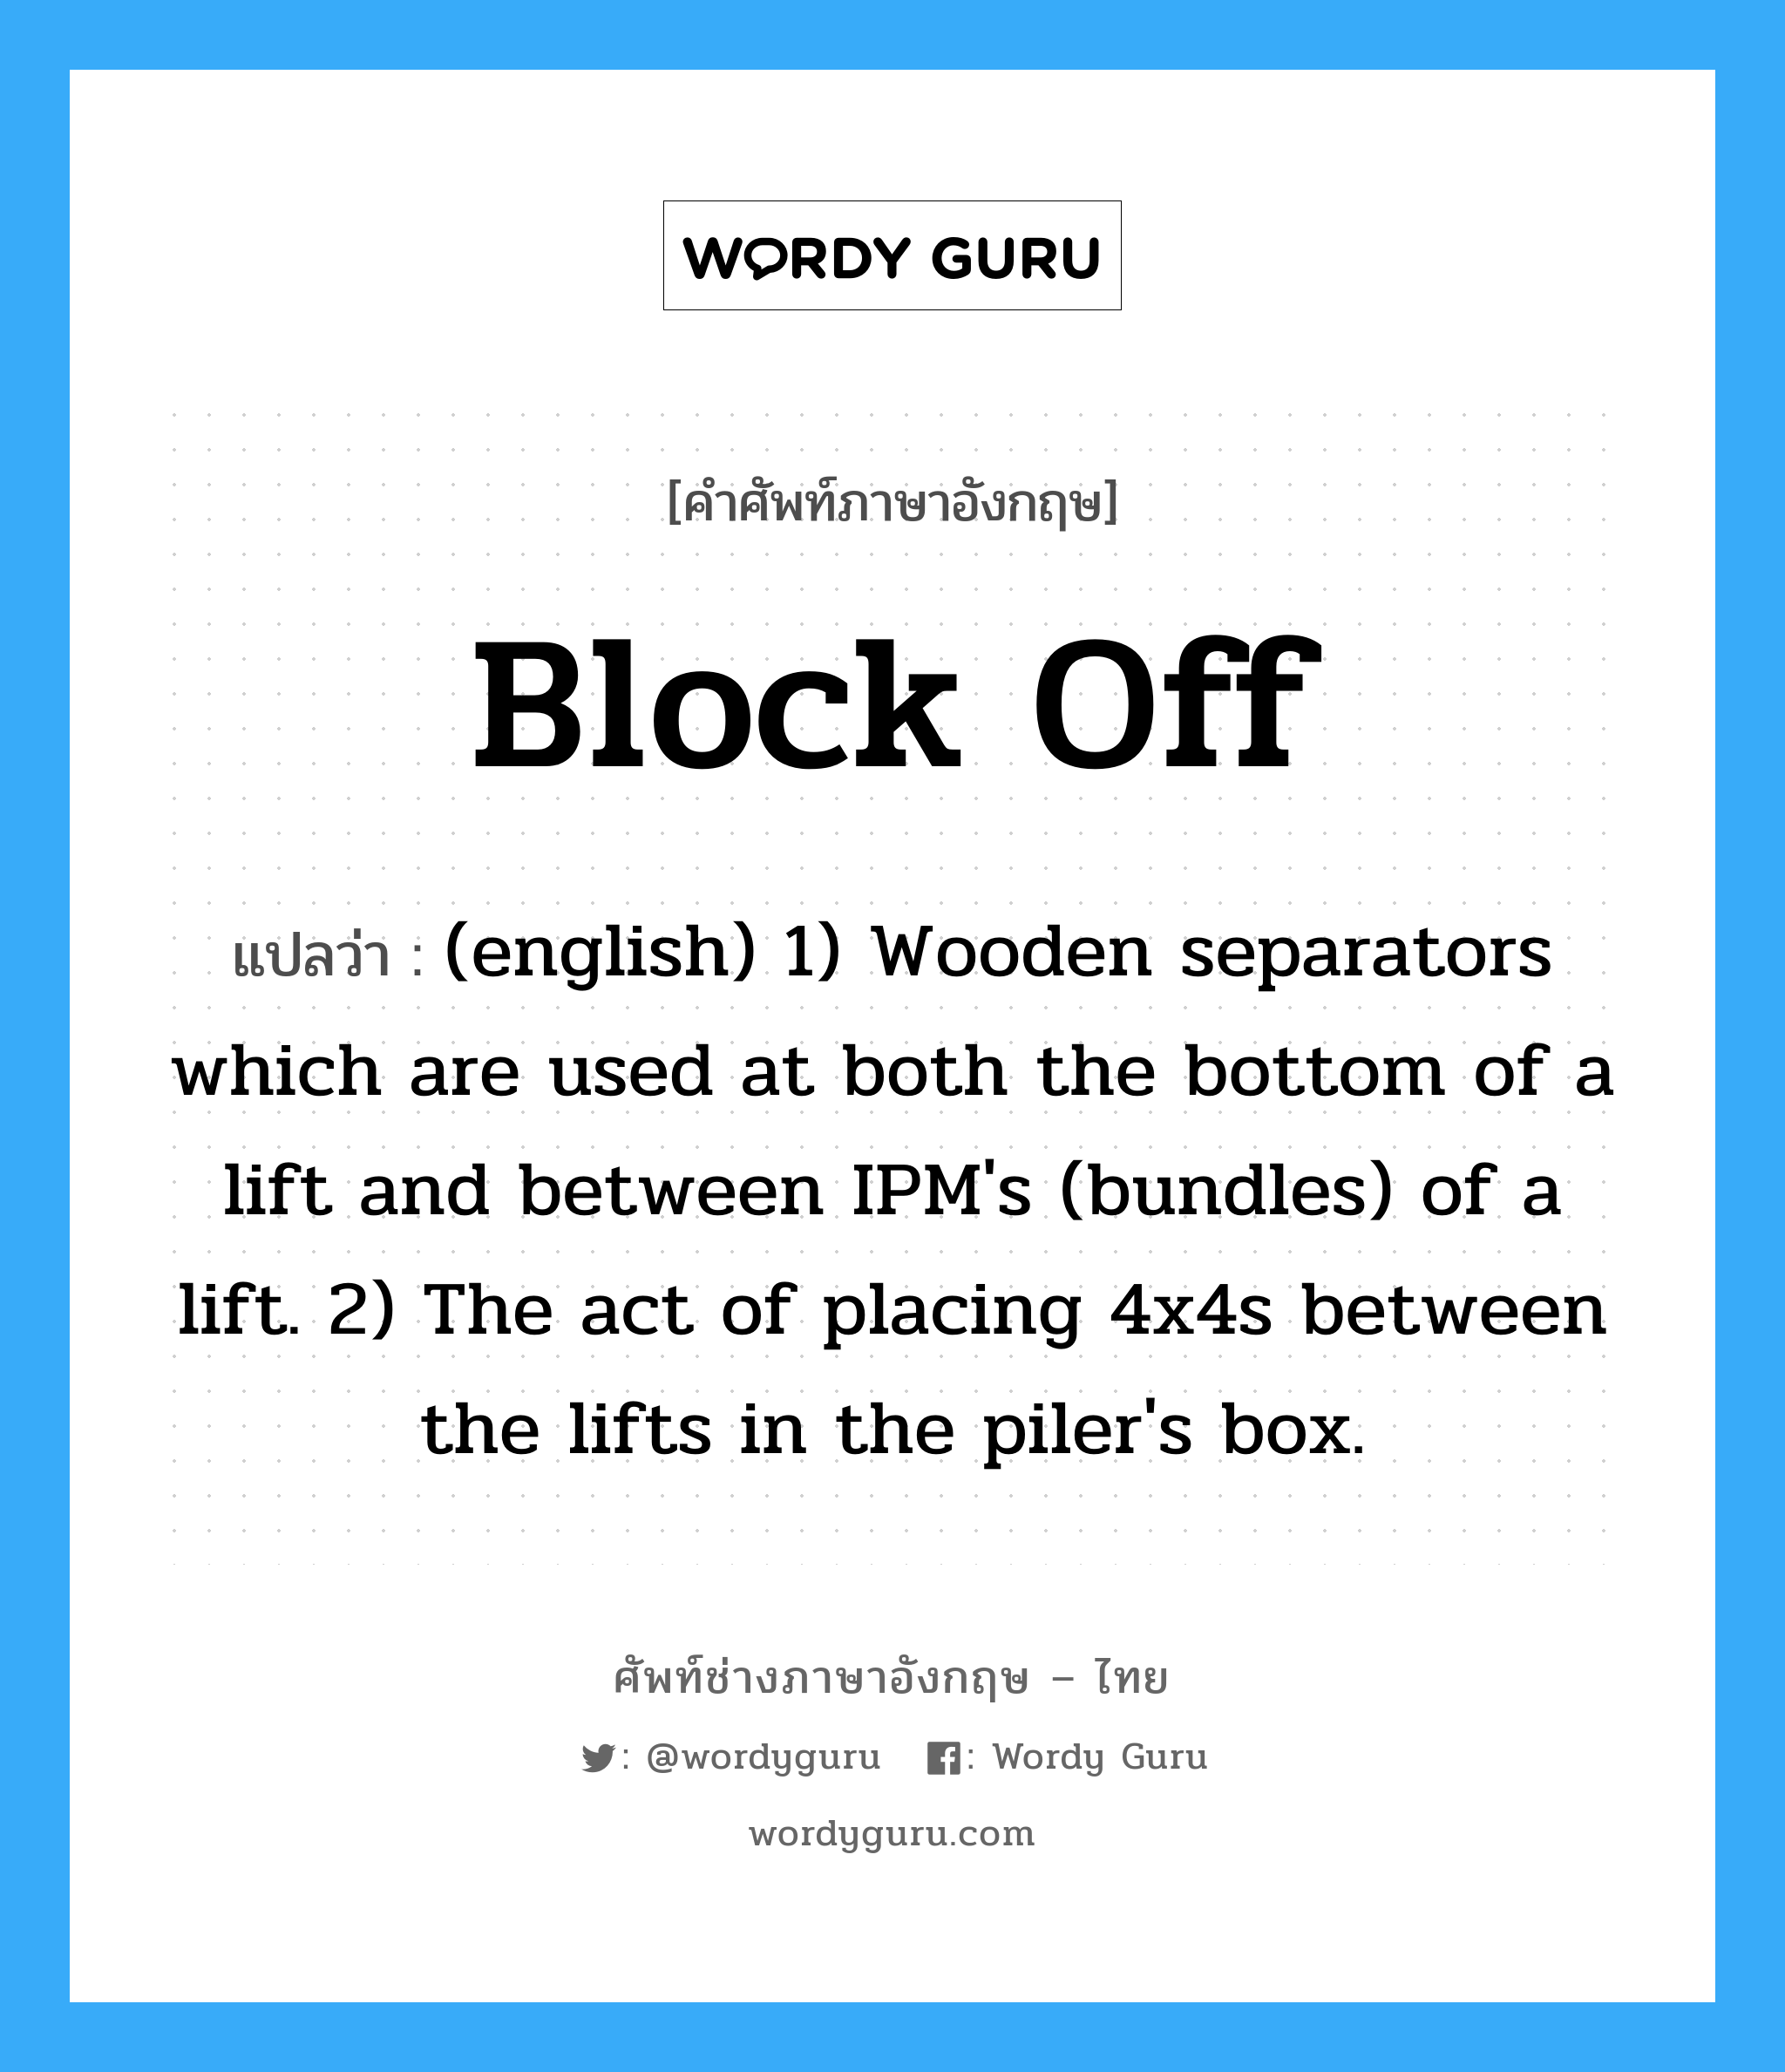 Block Off แปลว่า?, คำศัพท์ช่างภาษาอังกฤษ - ไทย Block Off คำศัพท์ภาษาอังกฤษ Block Off แปลว่า (english) 1) Wooden separators which are used at both the bottom of a lift and between IPM's (bundles) of a lift. 2) The act of placing 4x4s between the lifts in the piler's box.